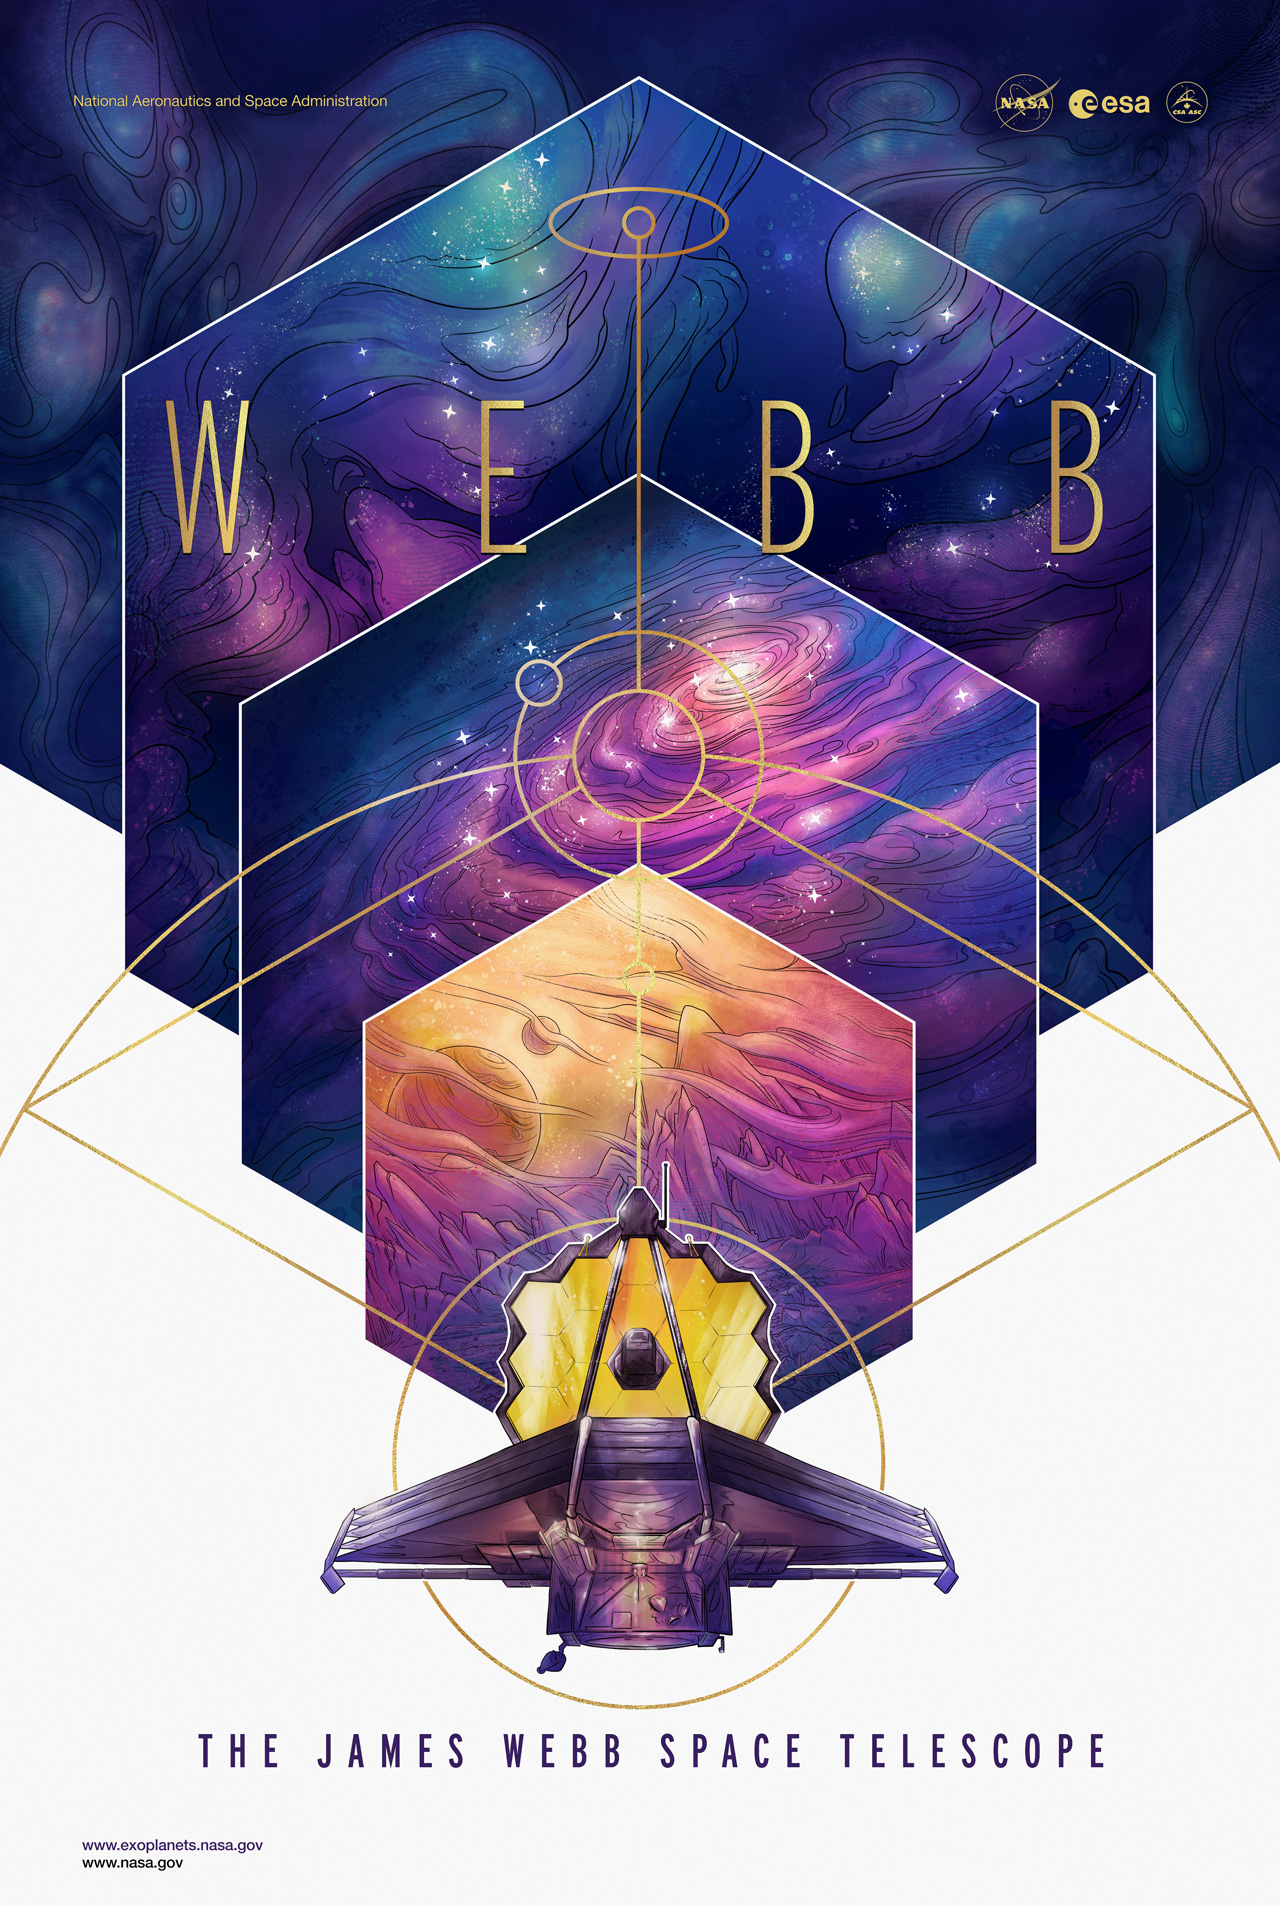 illustrated poster depicting the James Webb Space Telescope against a colorful geometric background